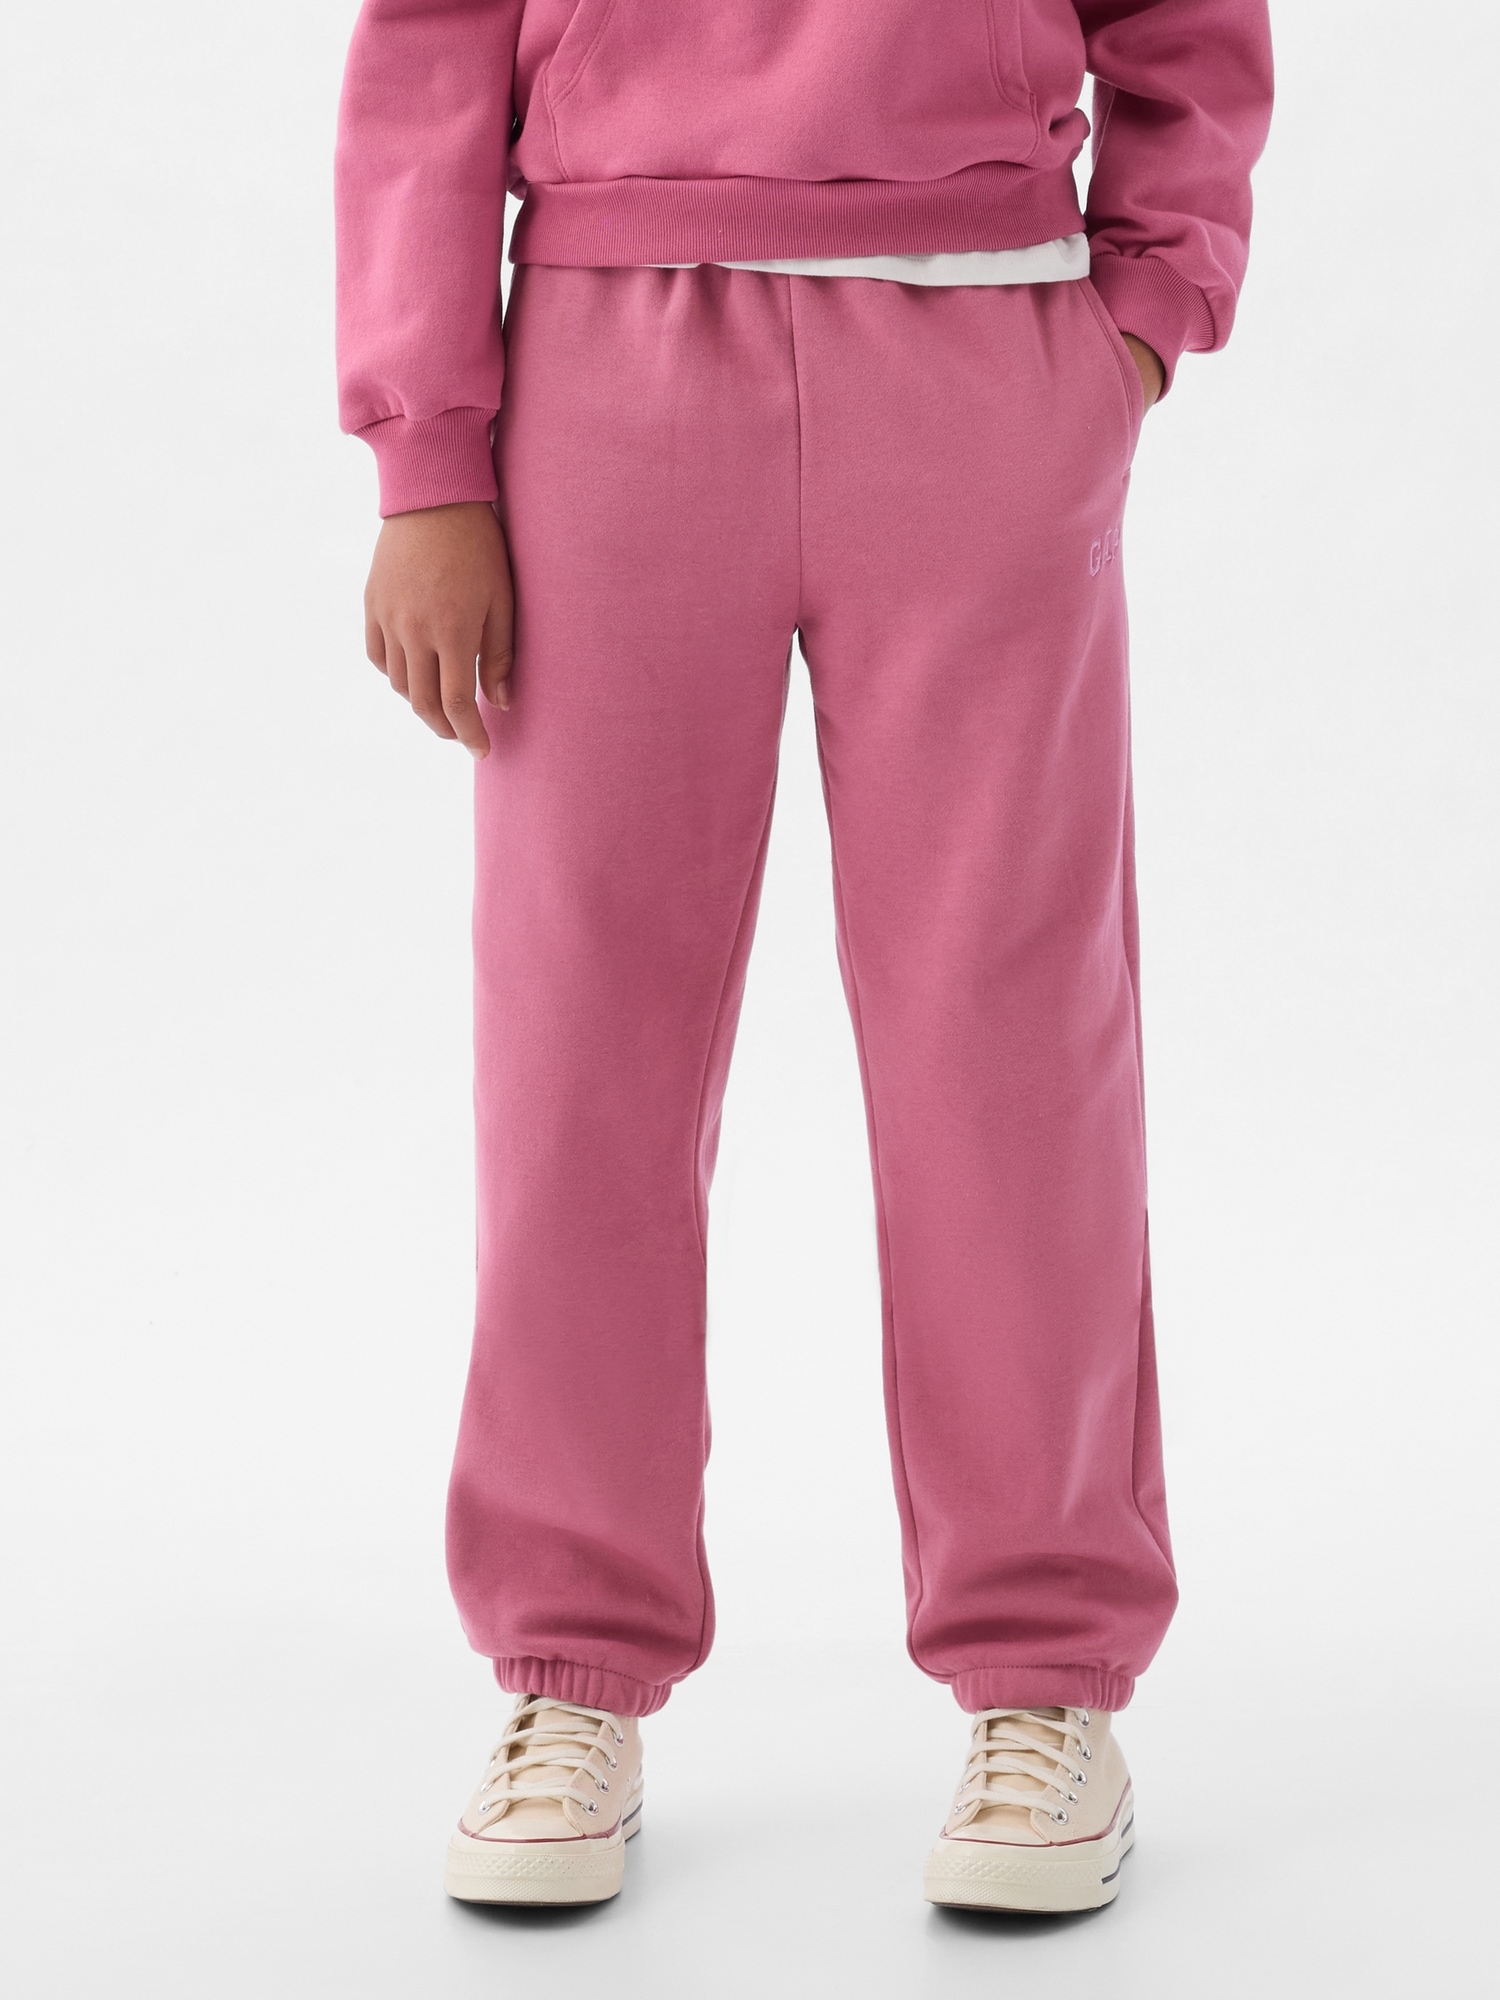 GAP Girls Tracksuit Trousers Joggers 3-4 Years Pink Cotton Sports